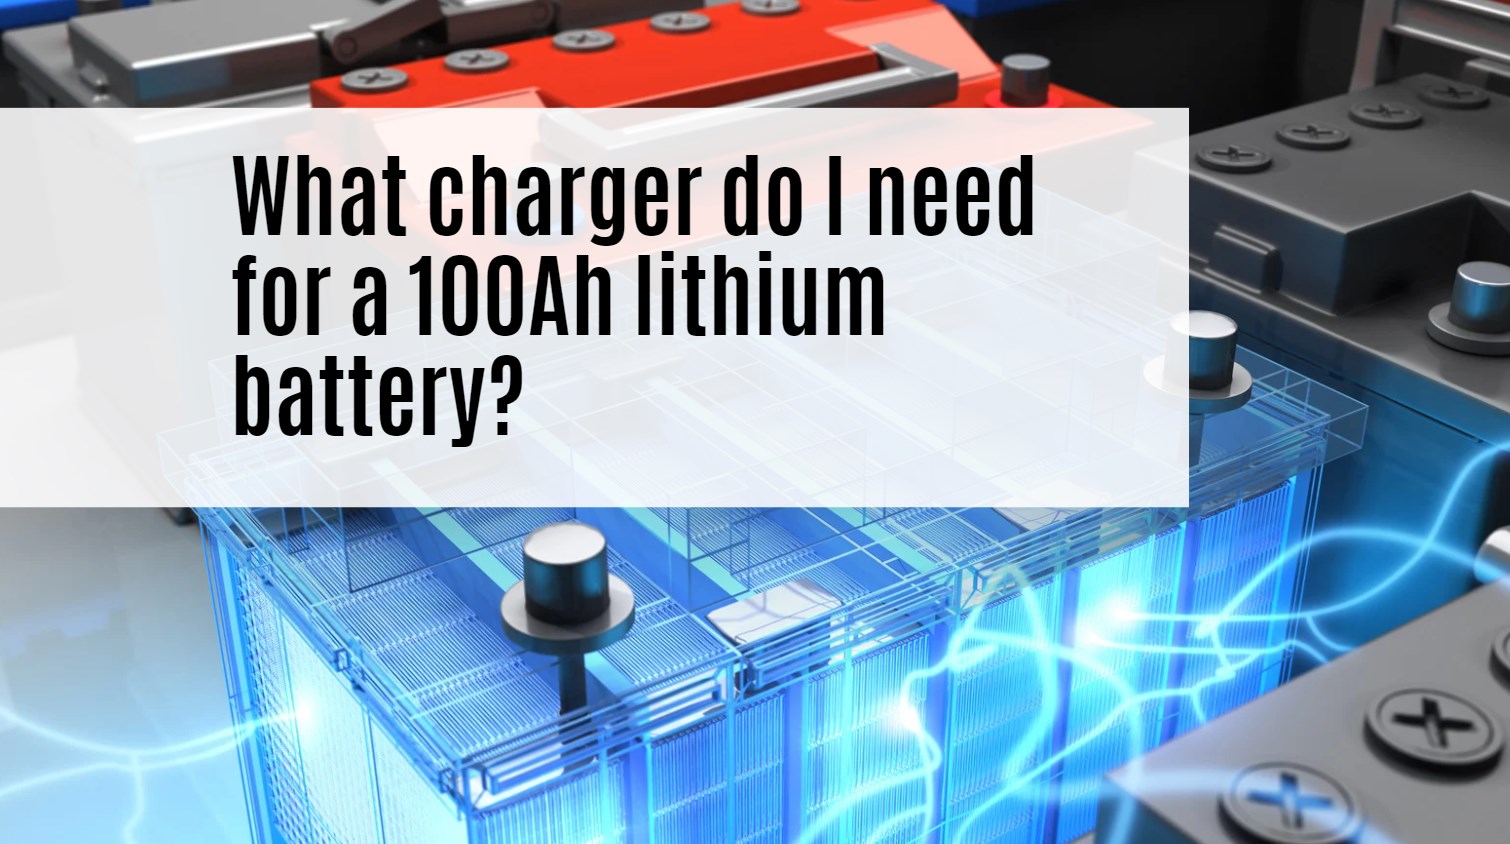 What charger do I need for a 100Ah lithium battery?